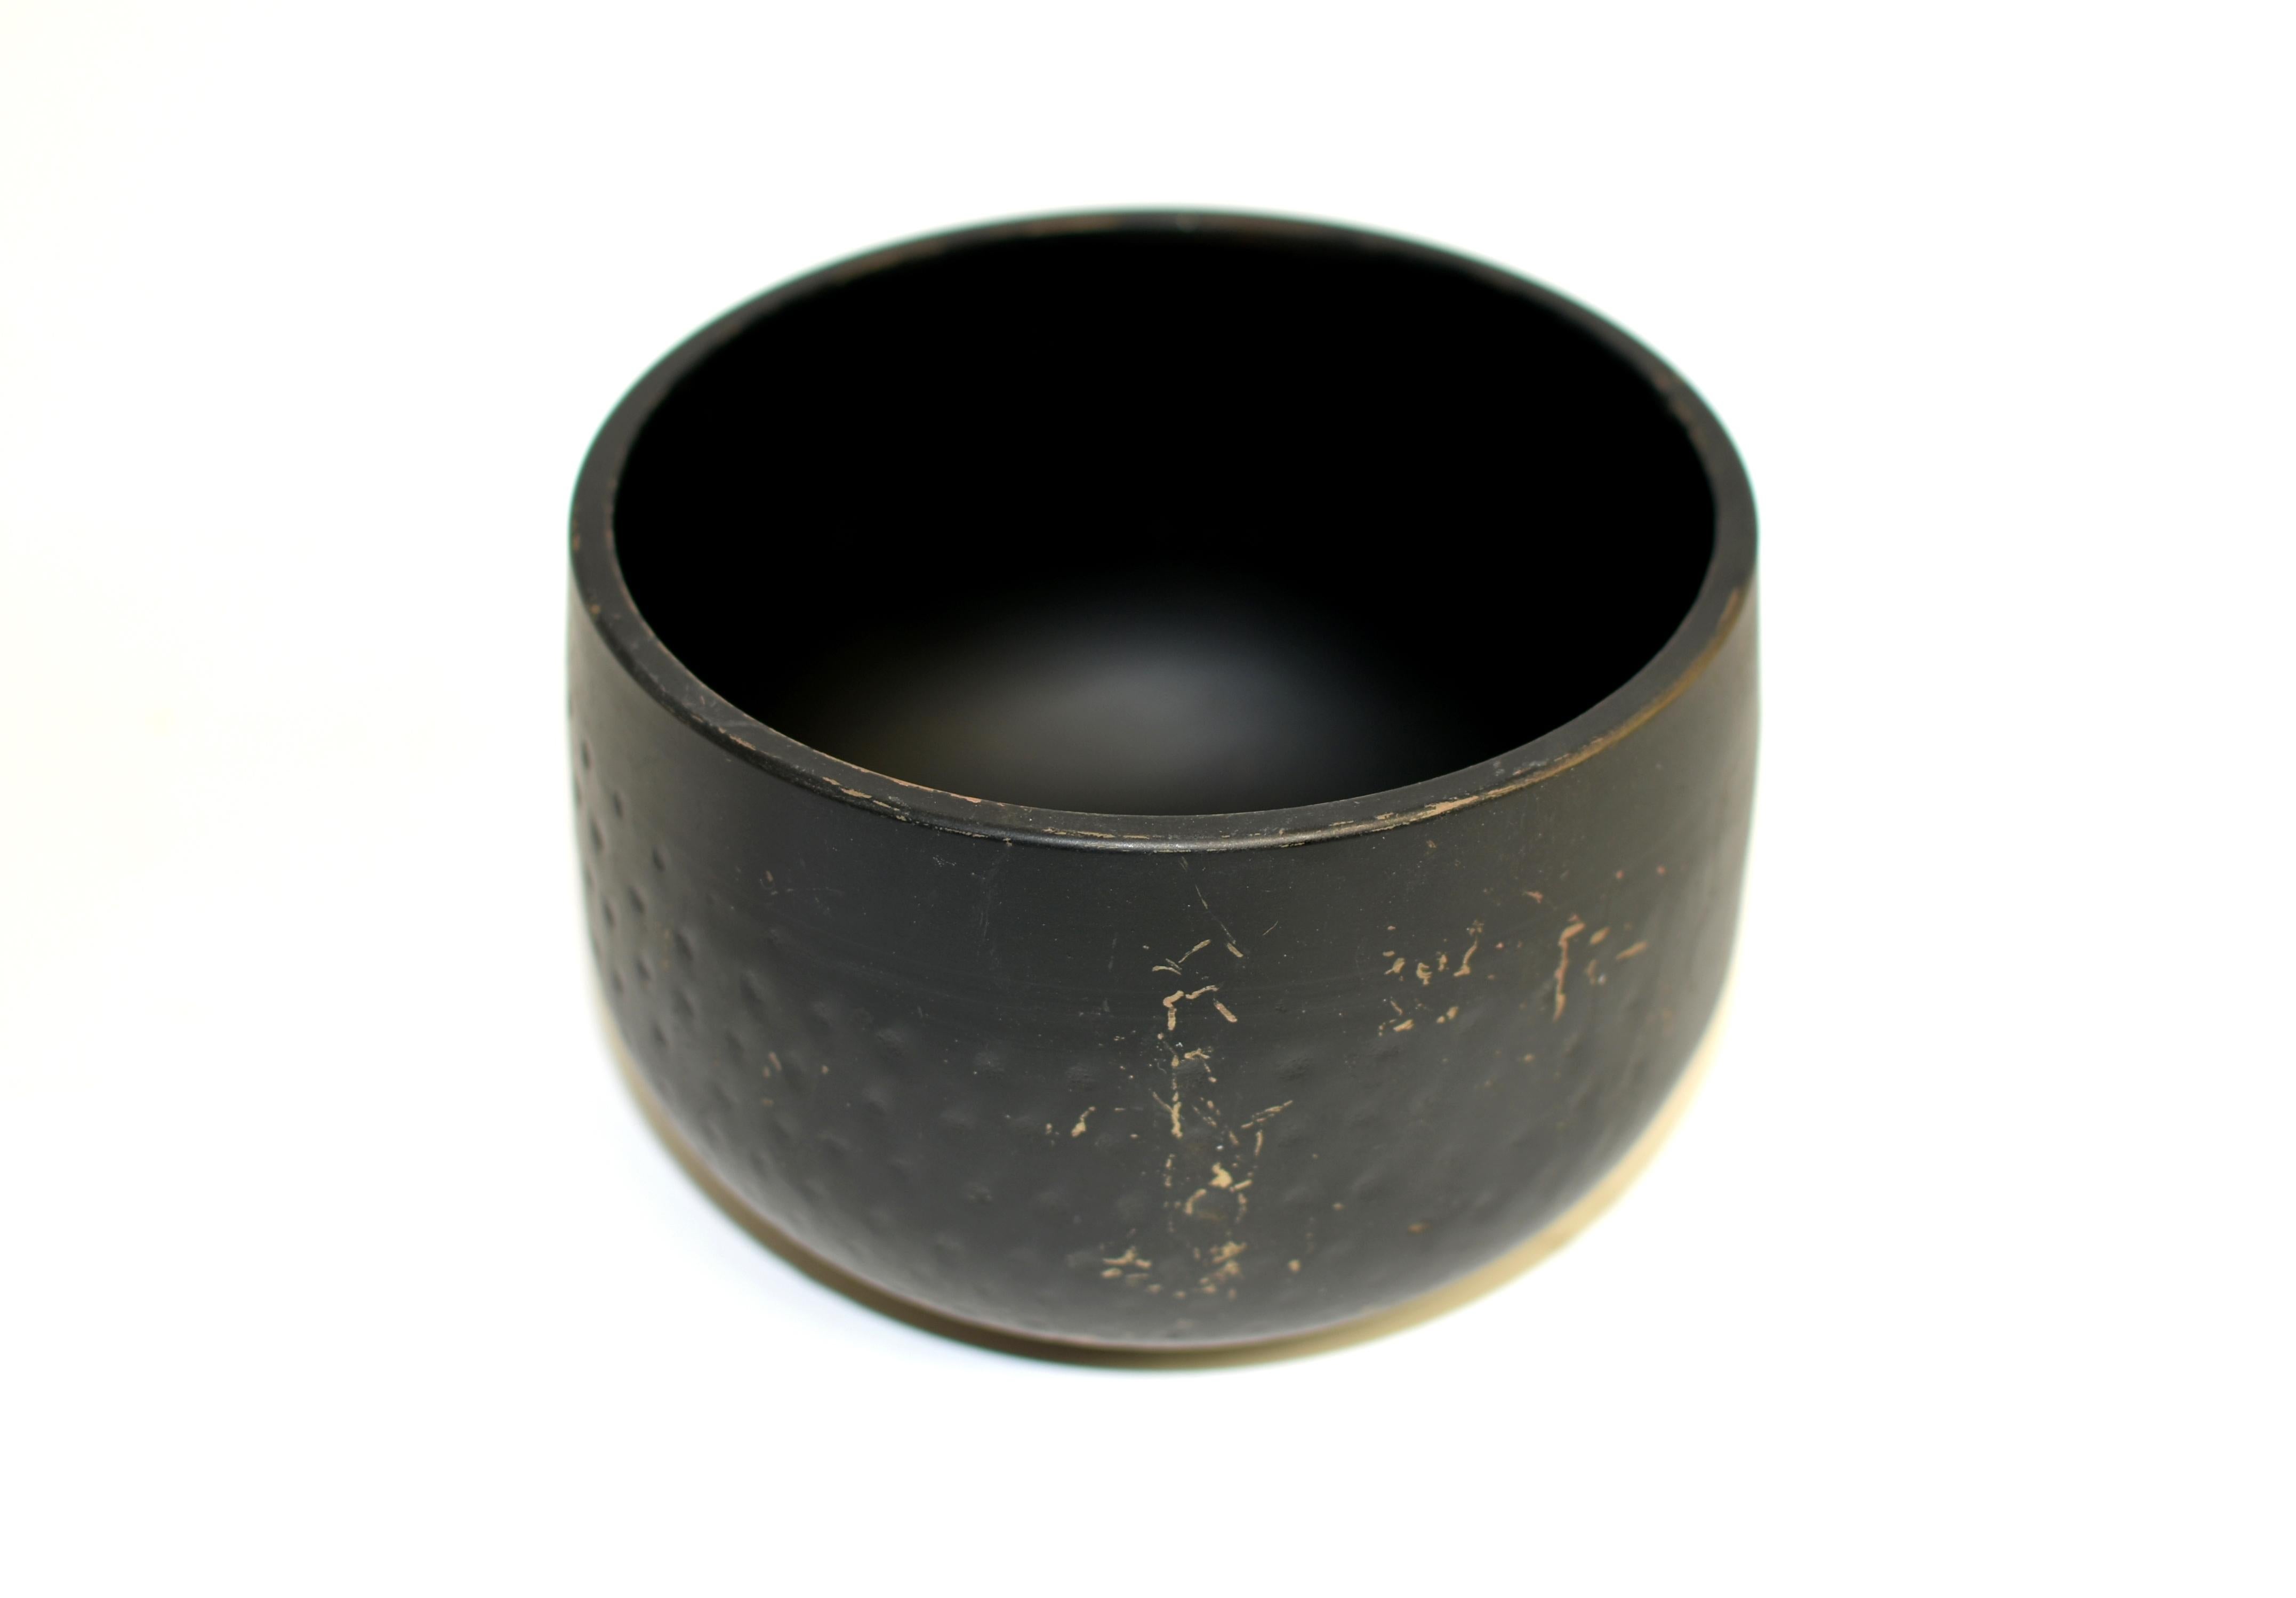 A beautiful solid black antique Japanese singing bowl in excellent condition.  Crafted in solid bronze with hand hammered divots, the bowl embodies the classic Japanese aesthetics where beauty is found in nature, order and simplicity. Black